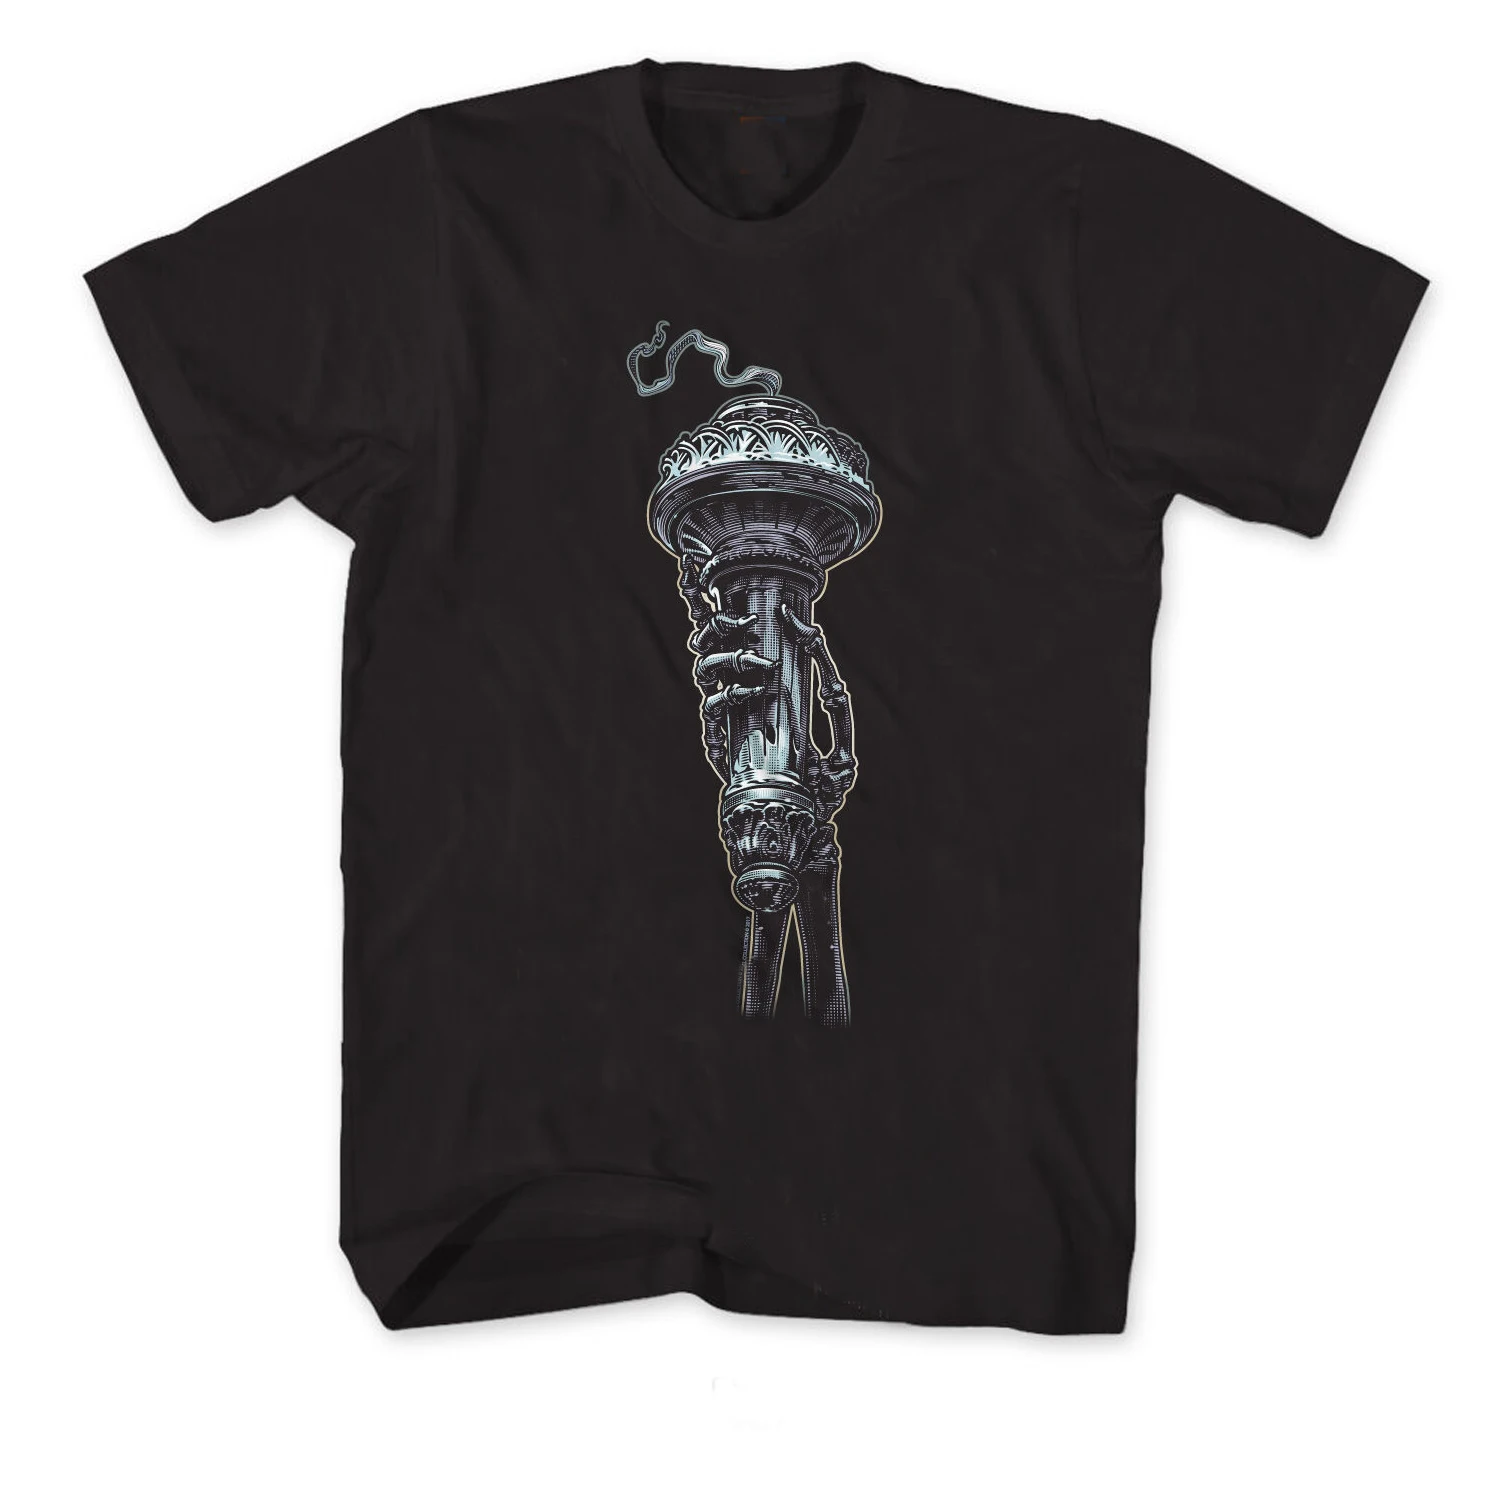 

Liberty Torch Statue New York Tattoo T Shirt. Short Sleeve 100% Cotton Casual T-shirts Loose Top Size S-3XL